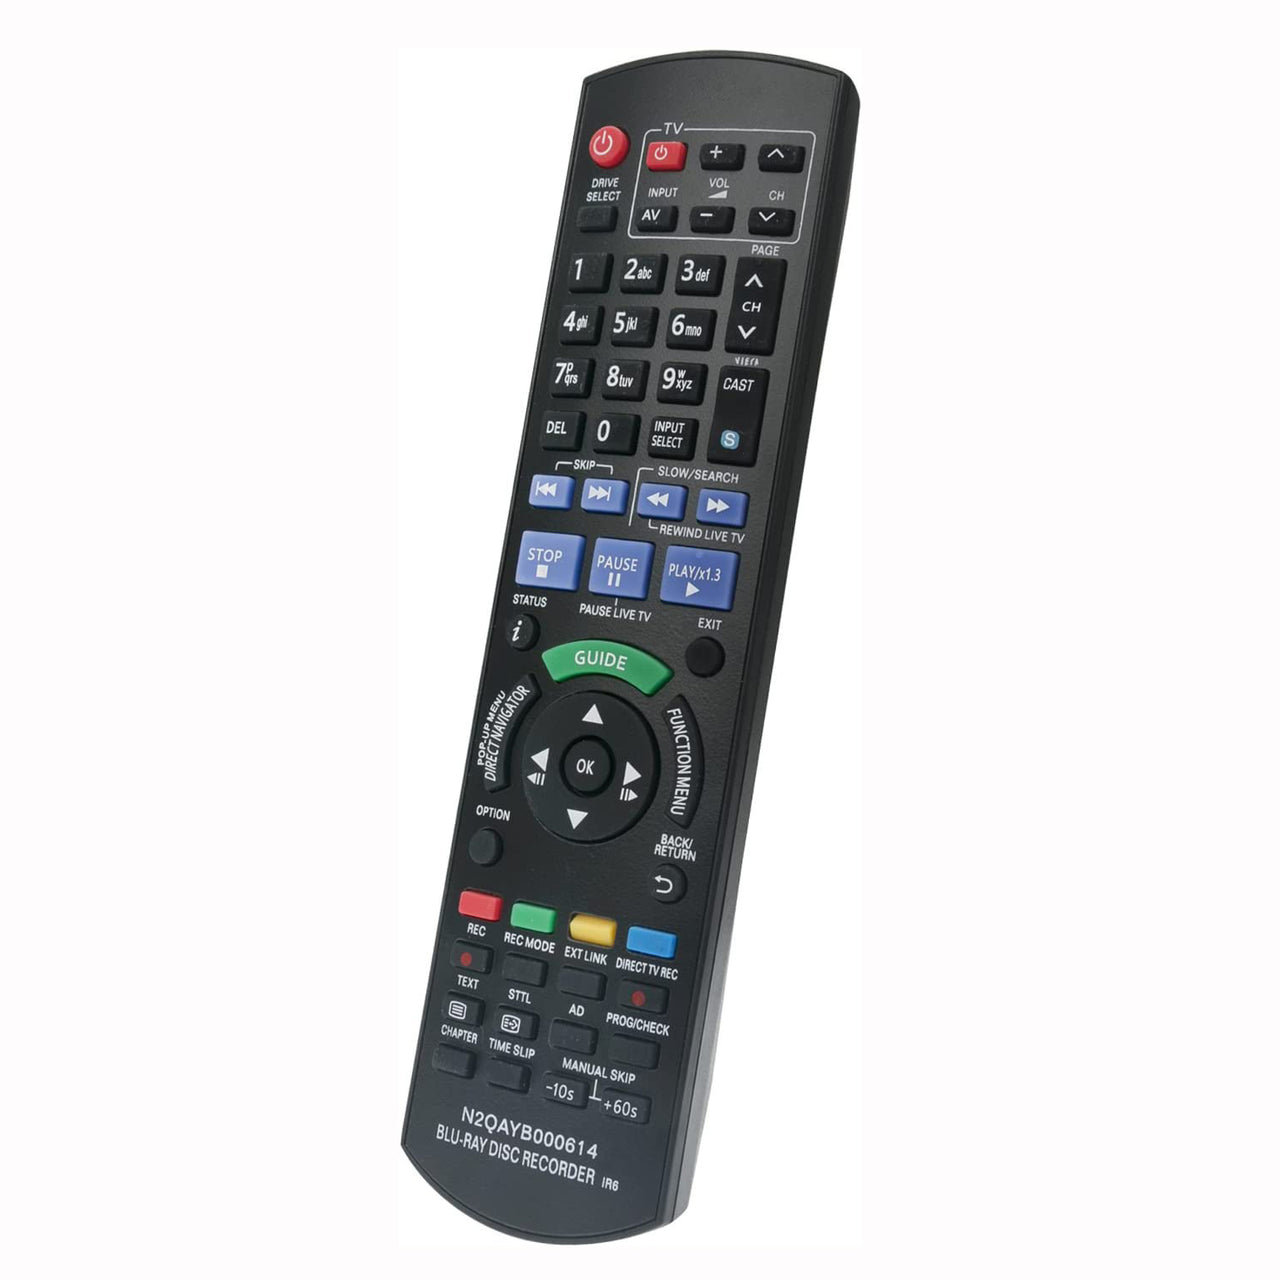 N2QAYB000614 Replacement Remote for Panasonic DVD Recorder